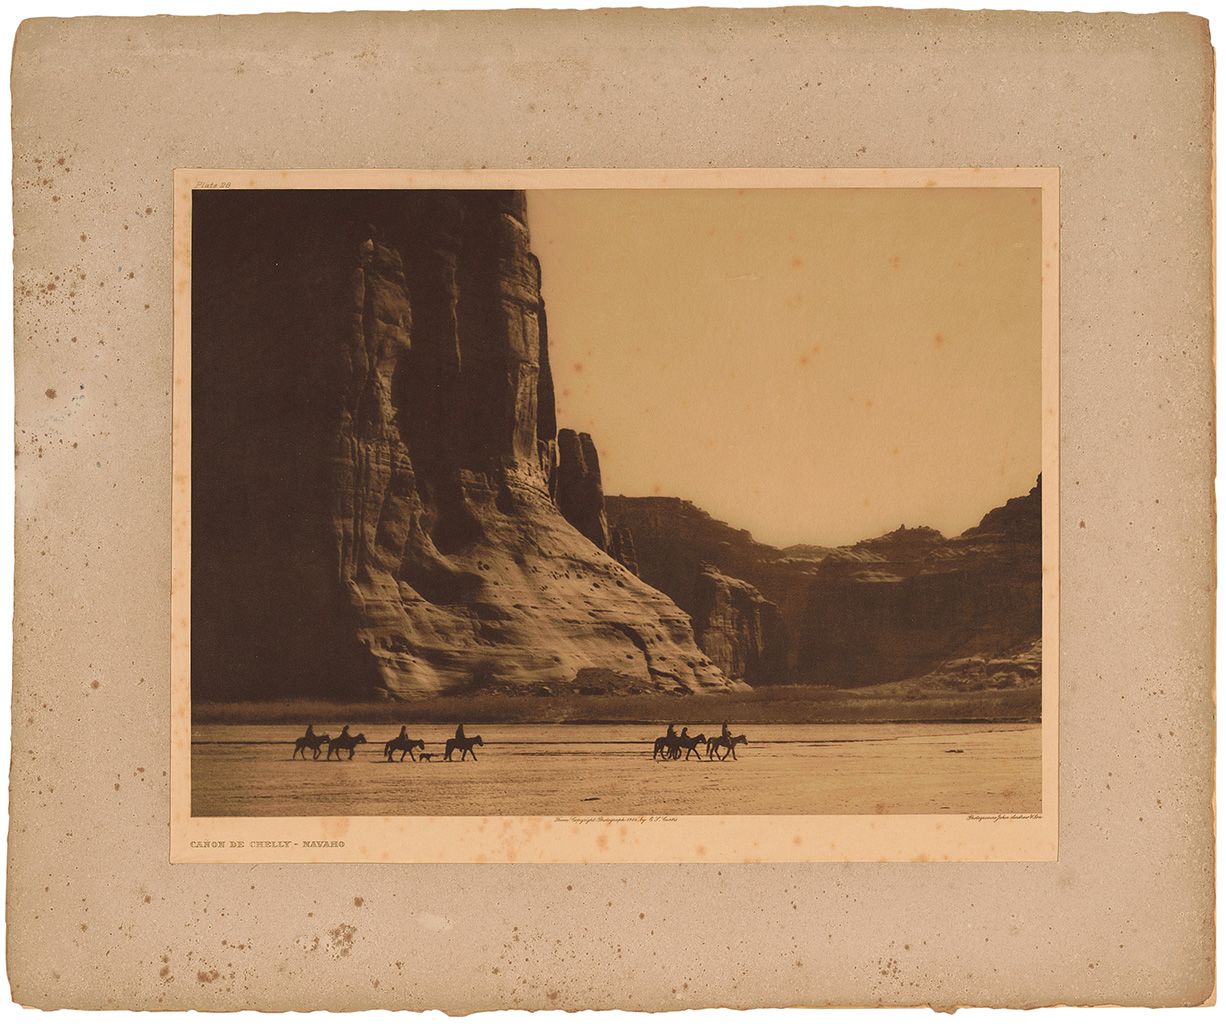 Severe foxing and yellowing has left this Curtis Plate 28 Canon de Chelly - Navaho photogravure on tissue in a fragile state.